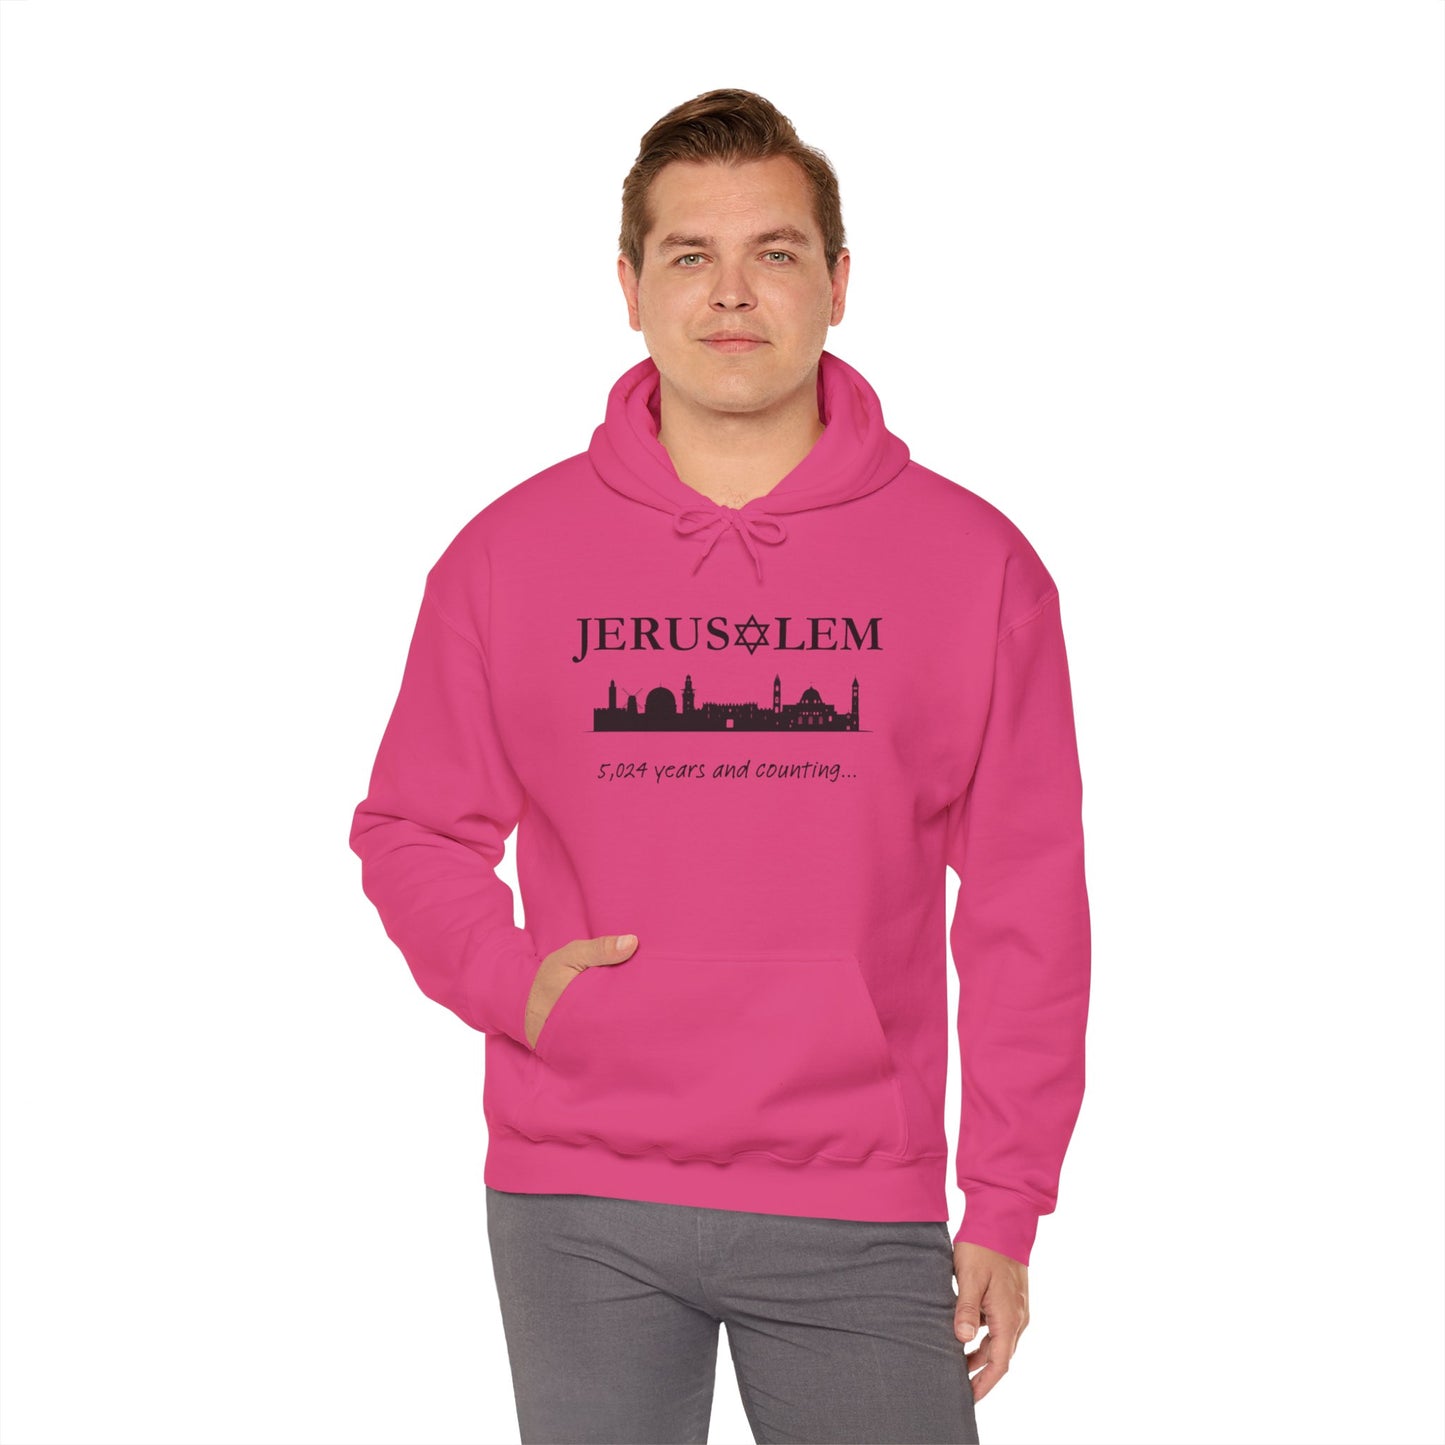 Jerusalem - 5,024 Years and Counting Hooded Sweatshirt